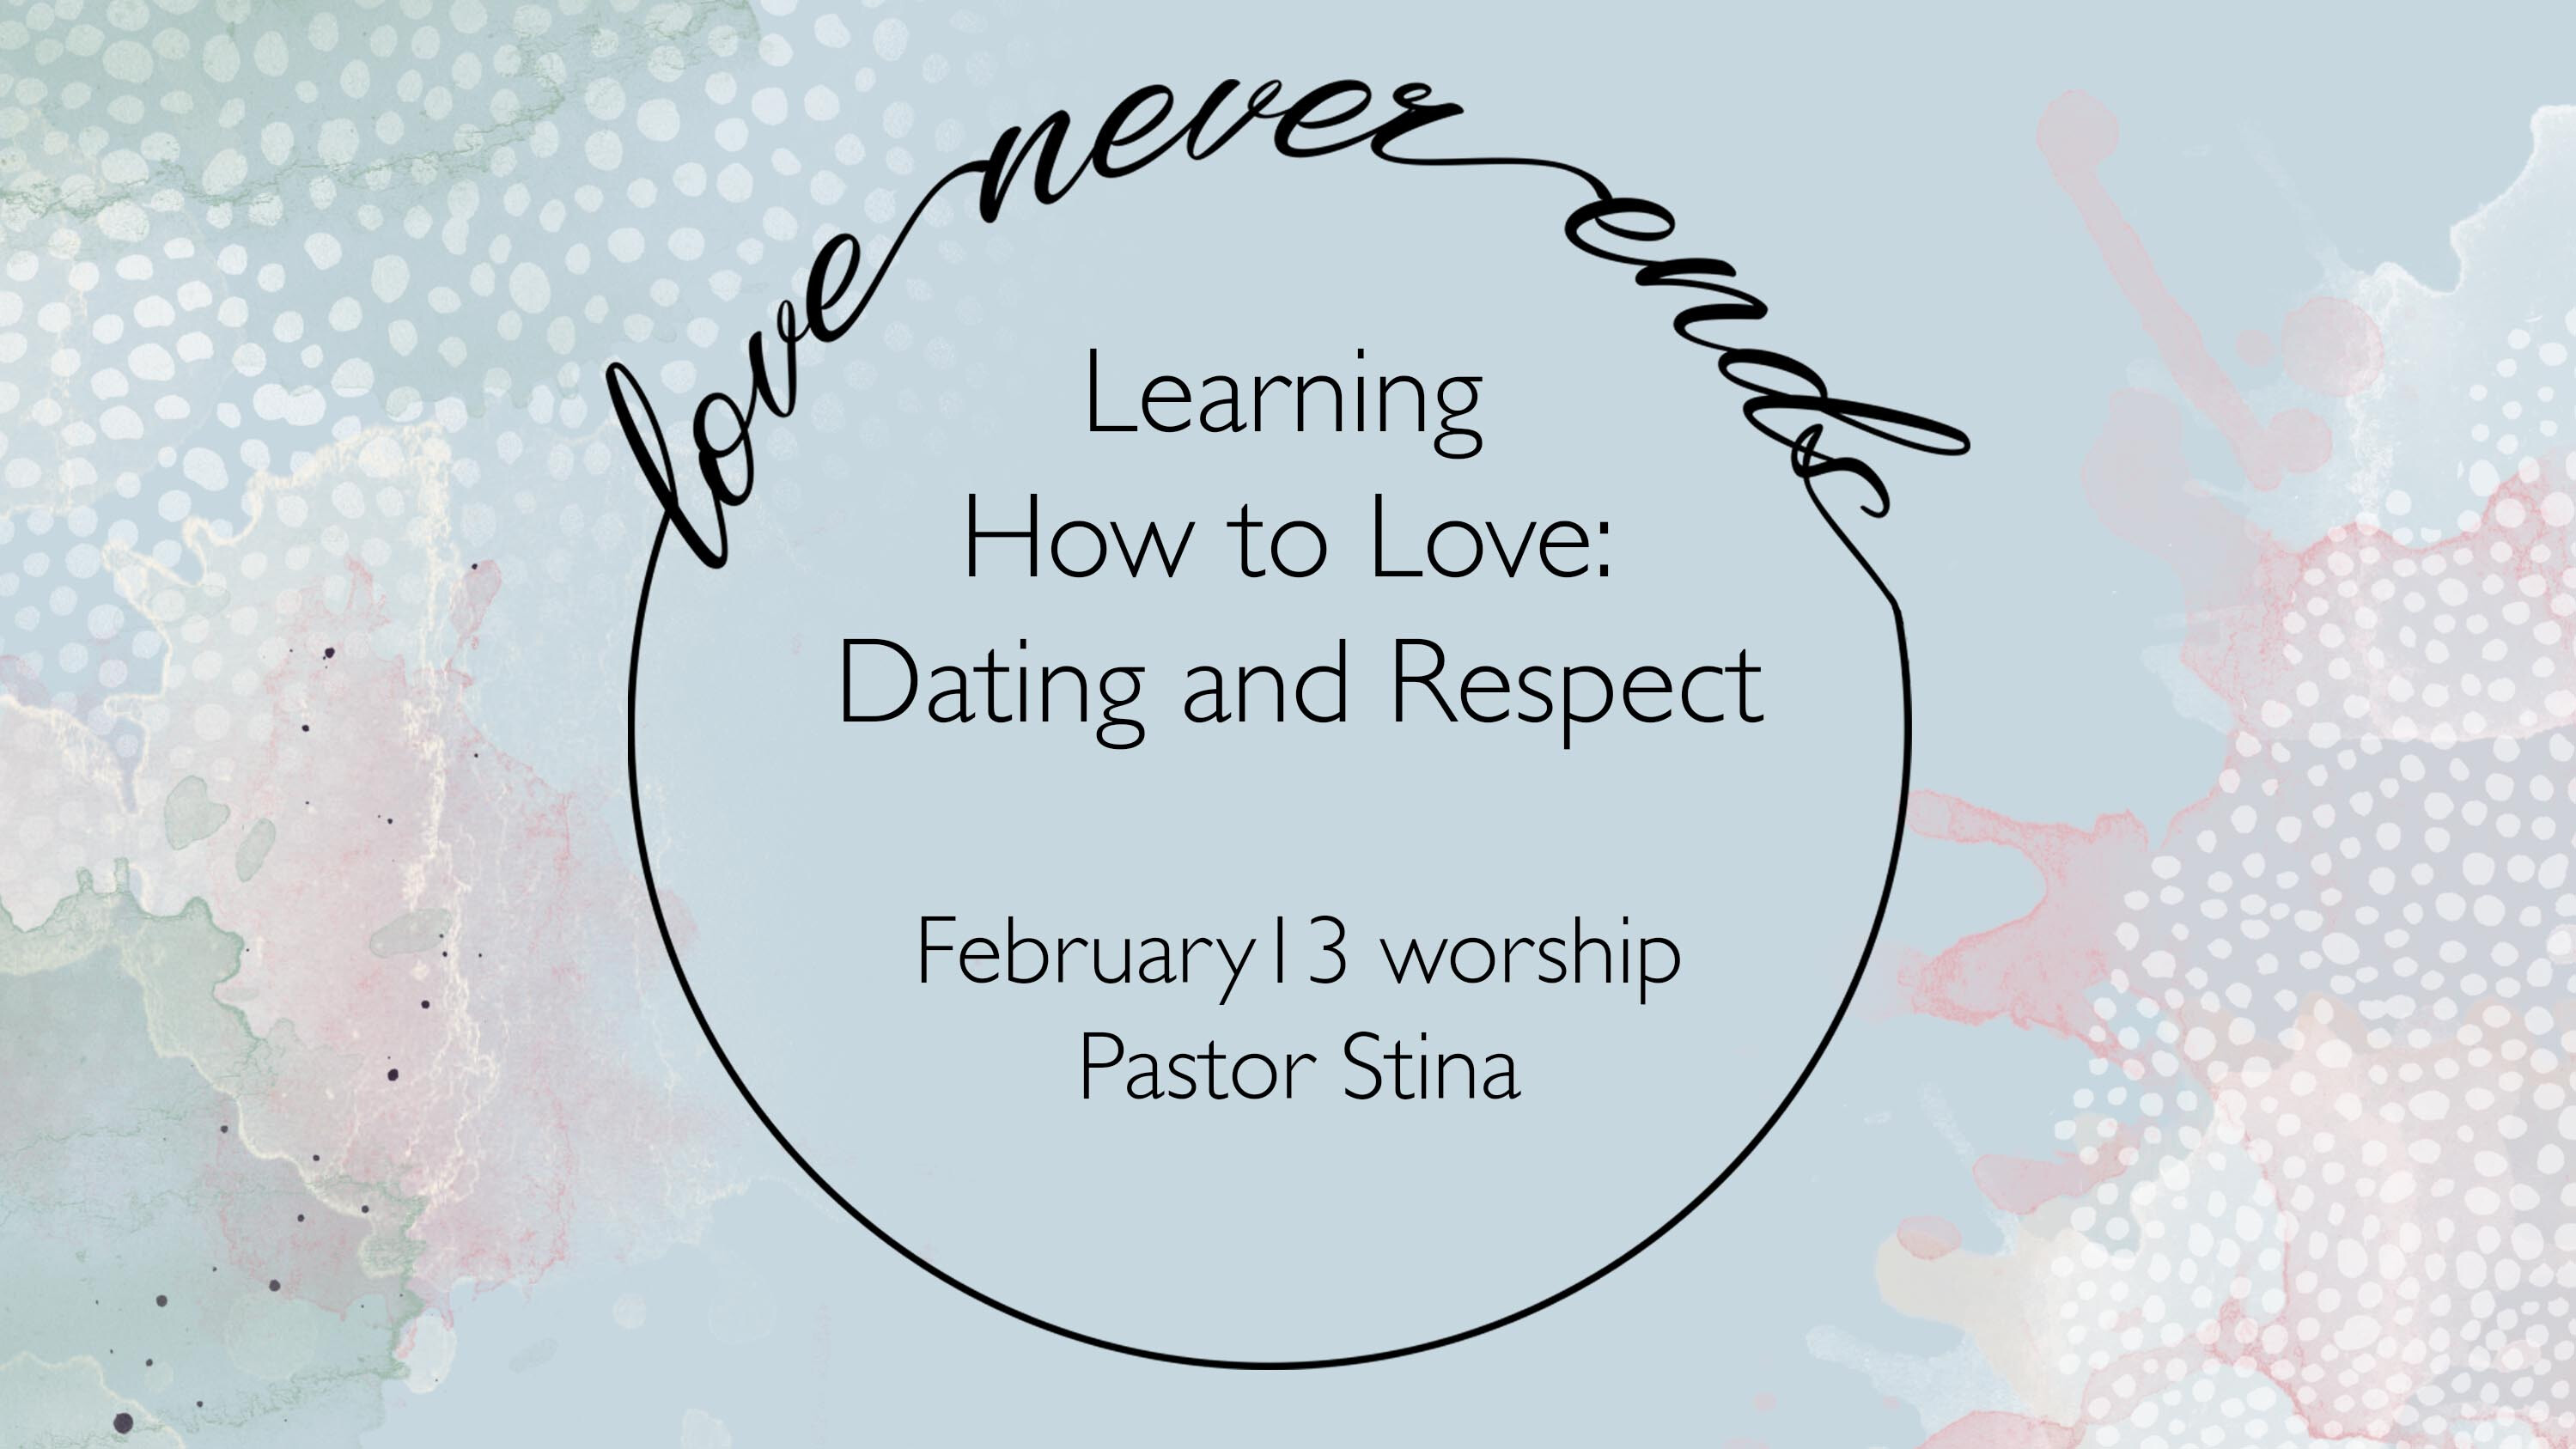 Learning How to Love: Dating and Respect